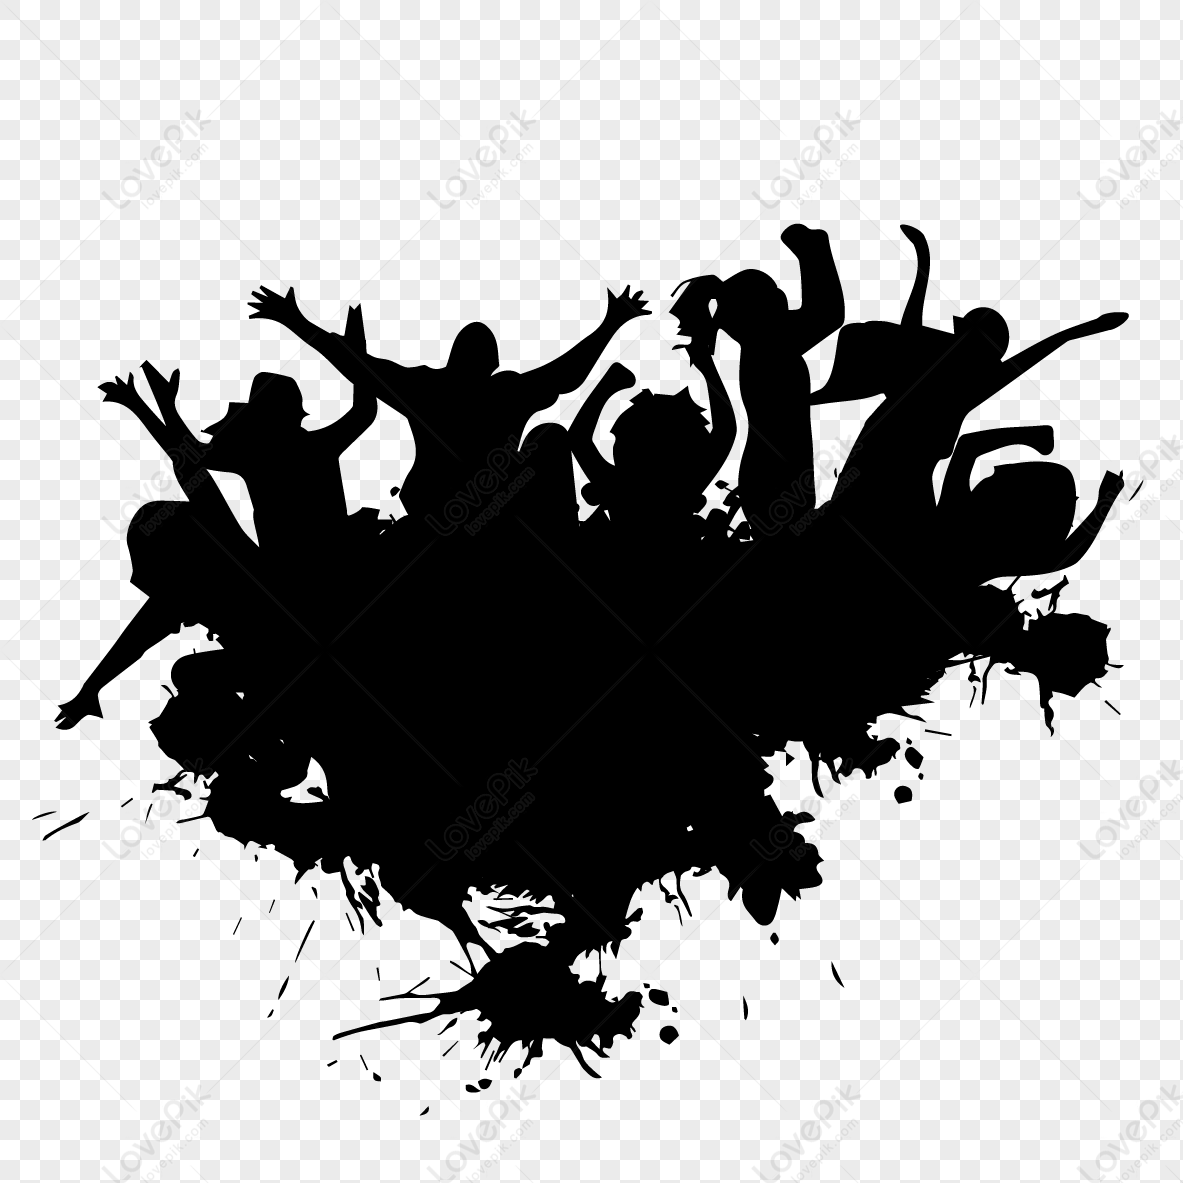 Multiple people silhouettes, black and white, multiple people silhouette, carnival png transparent background